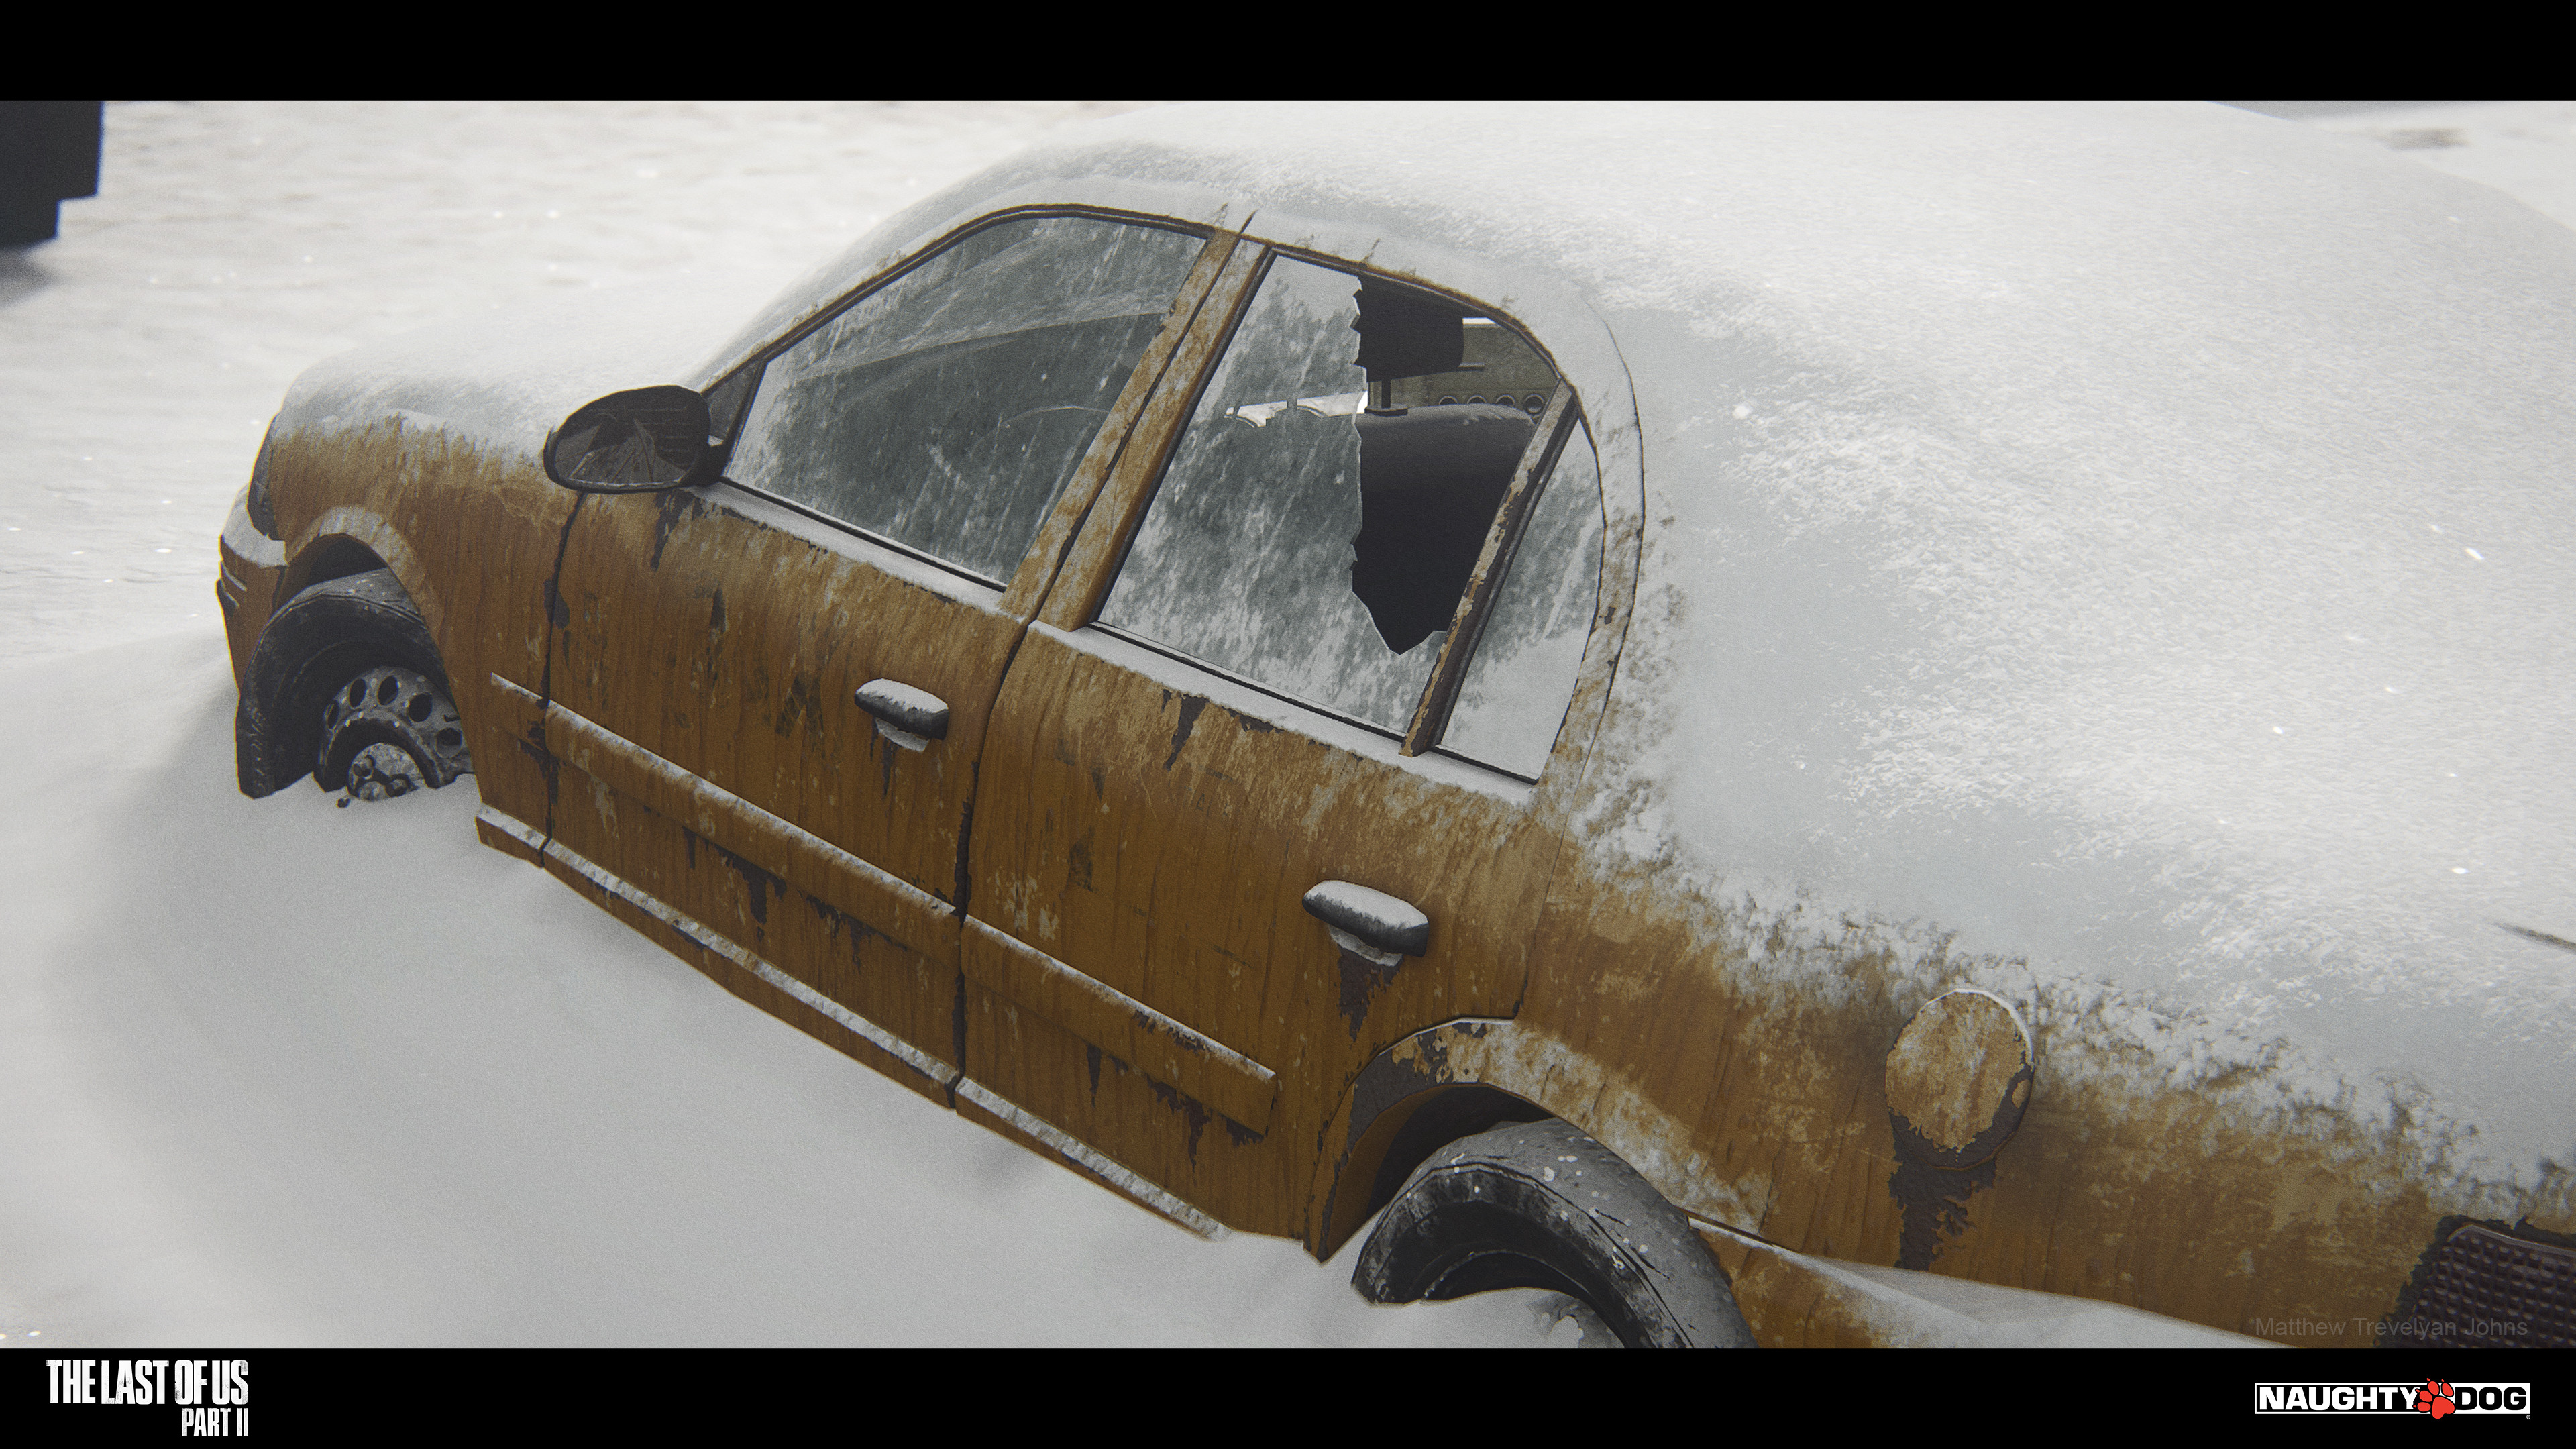 This image show the relatively seamless transition of a 'snow-kit' and the vehicles surface shader. If you look closely, you can see that the snow on the metal surface also has subtle 'depth' to it